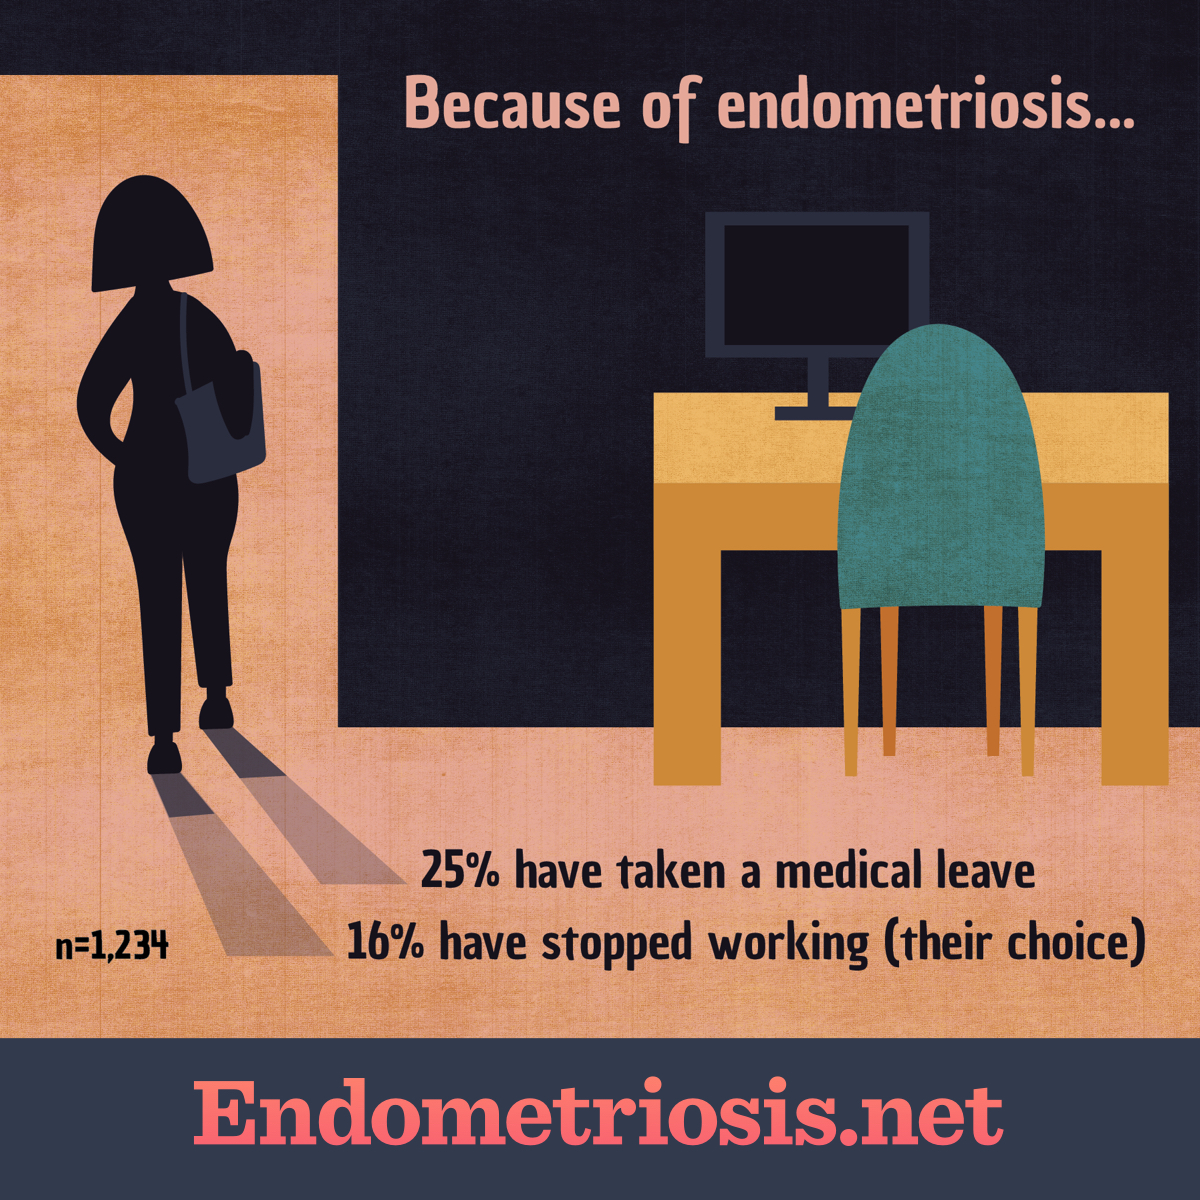 Because of endometriosis, 25% have taken a medical leave, 16% have stopped working (their choice)